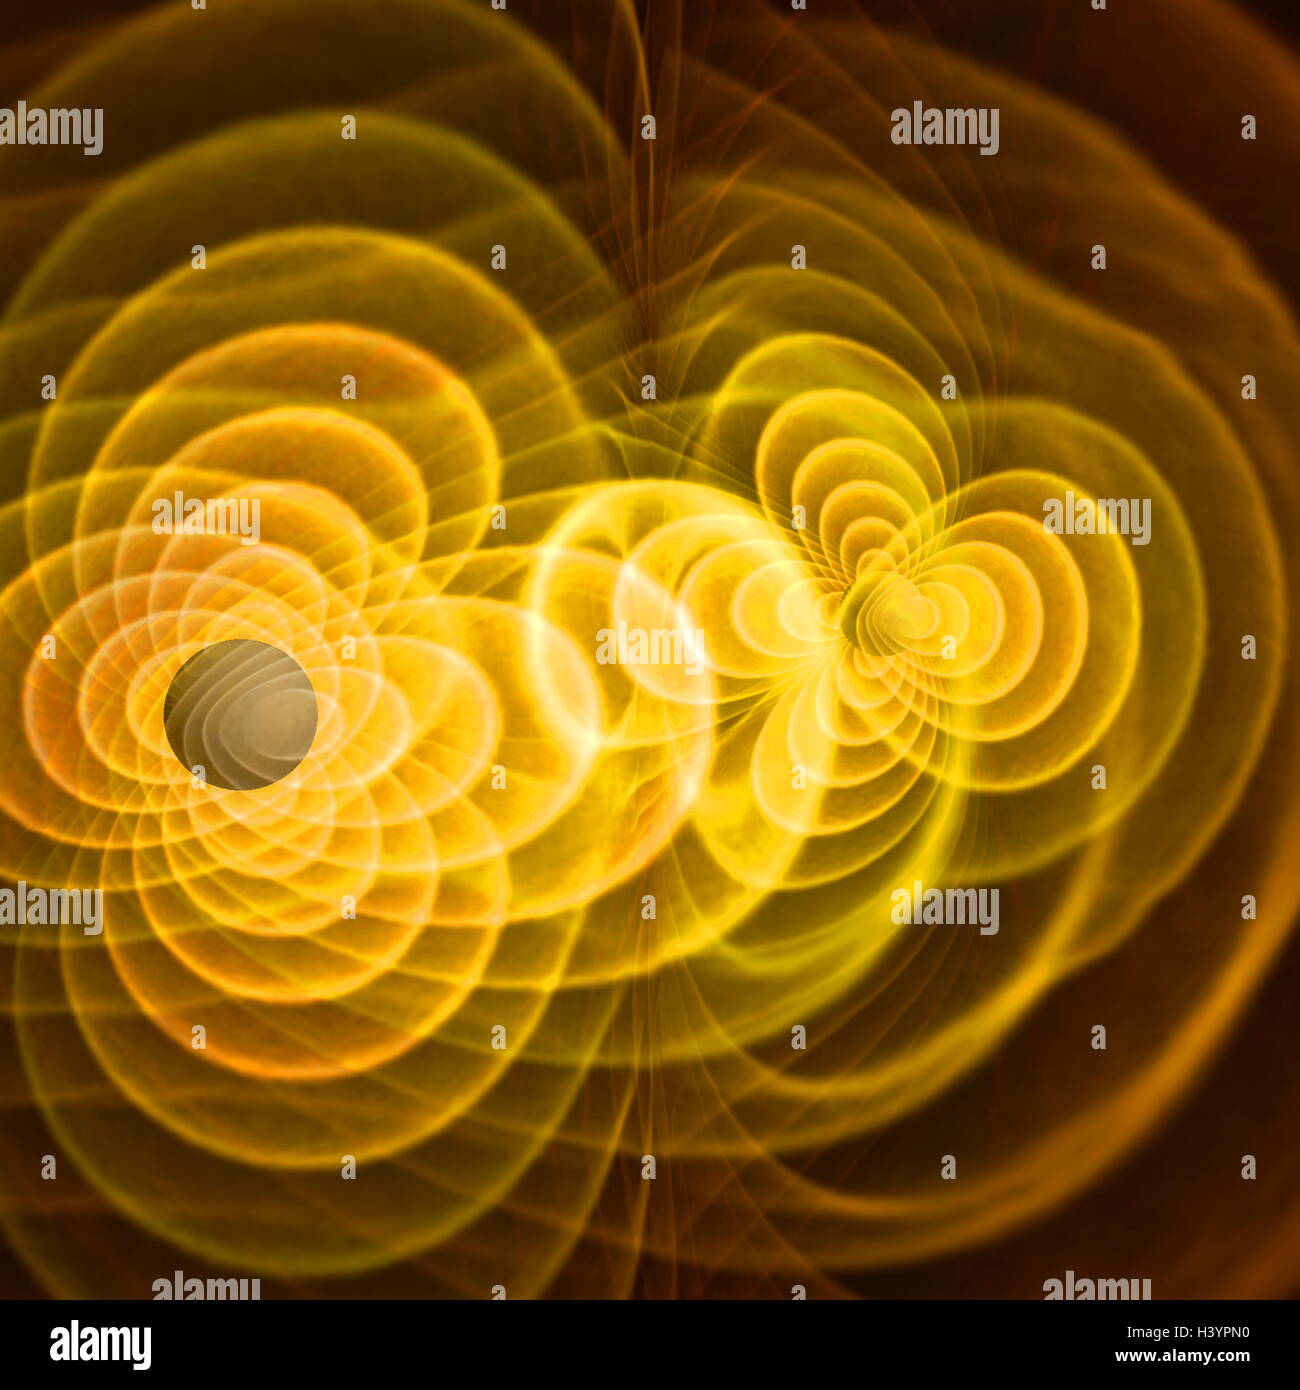 simulation of the merger of two black holes and the emission of gravitational radiation or waves (coloured fields, which represent a component of the curvature of space-time). The yellow areas near the black holes do not correspond to physical structures but generally indicate where the strong non-linear gravitational-field interactions are in play. Stock Photo